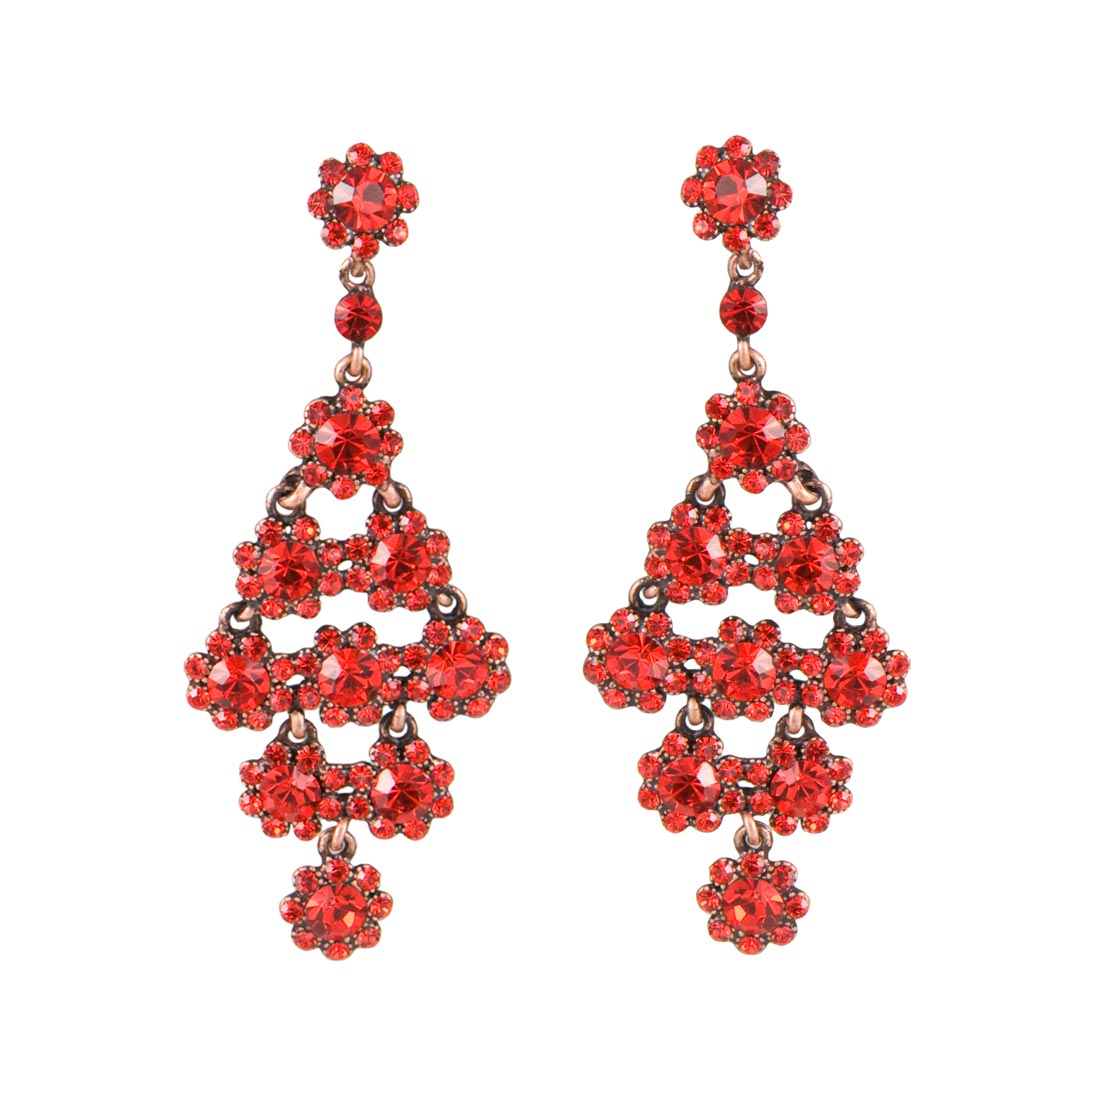 Strictly Scarlet Red Crystal Statement Chandelier Earrings